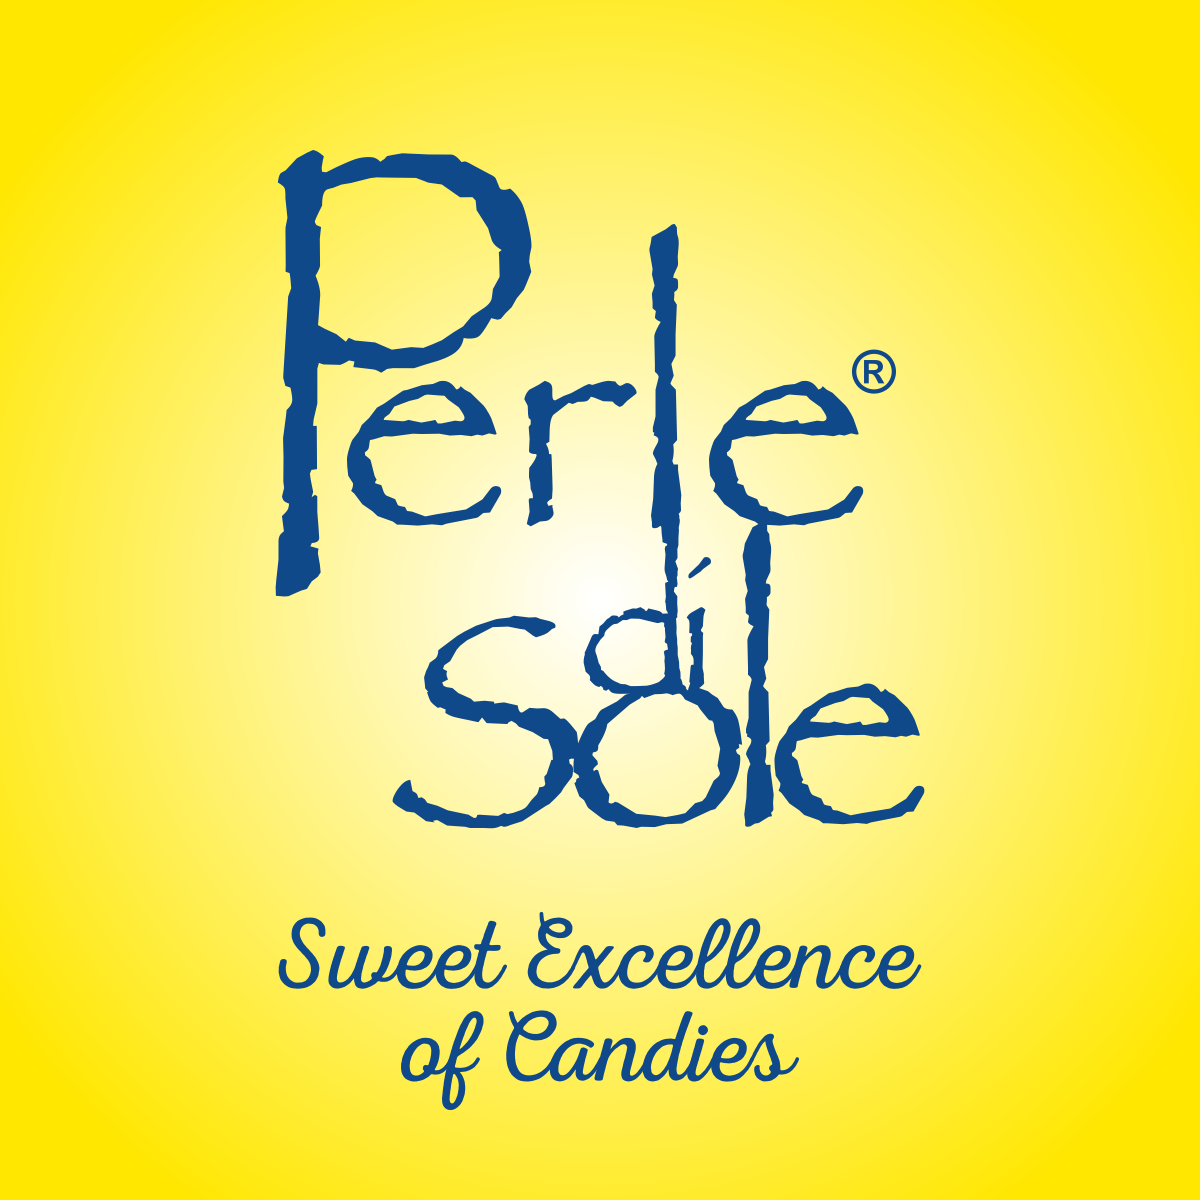 Perle di Sole - Sweet Excellence of Candies